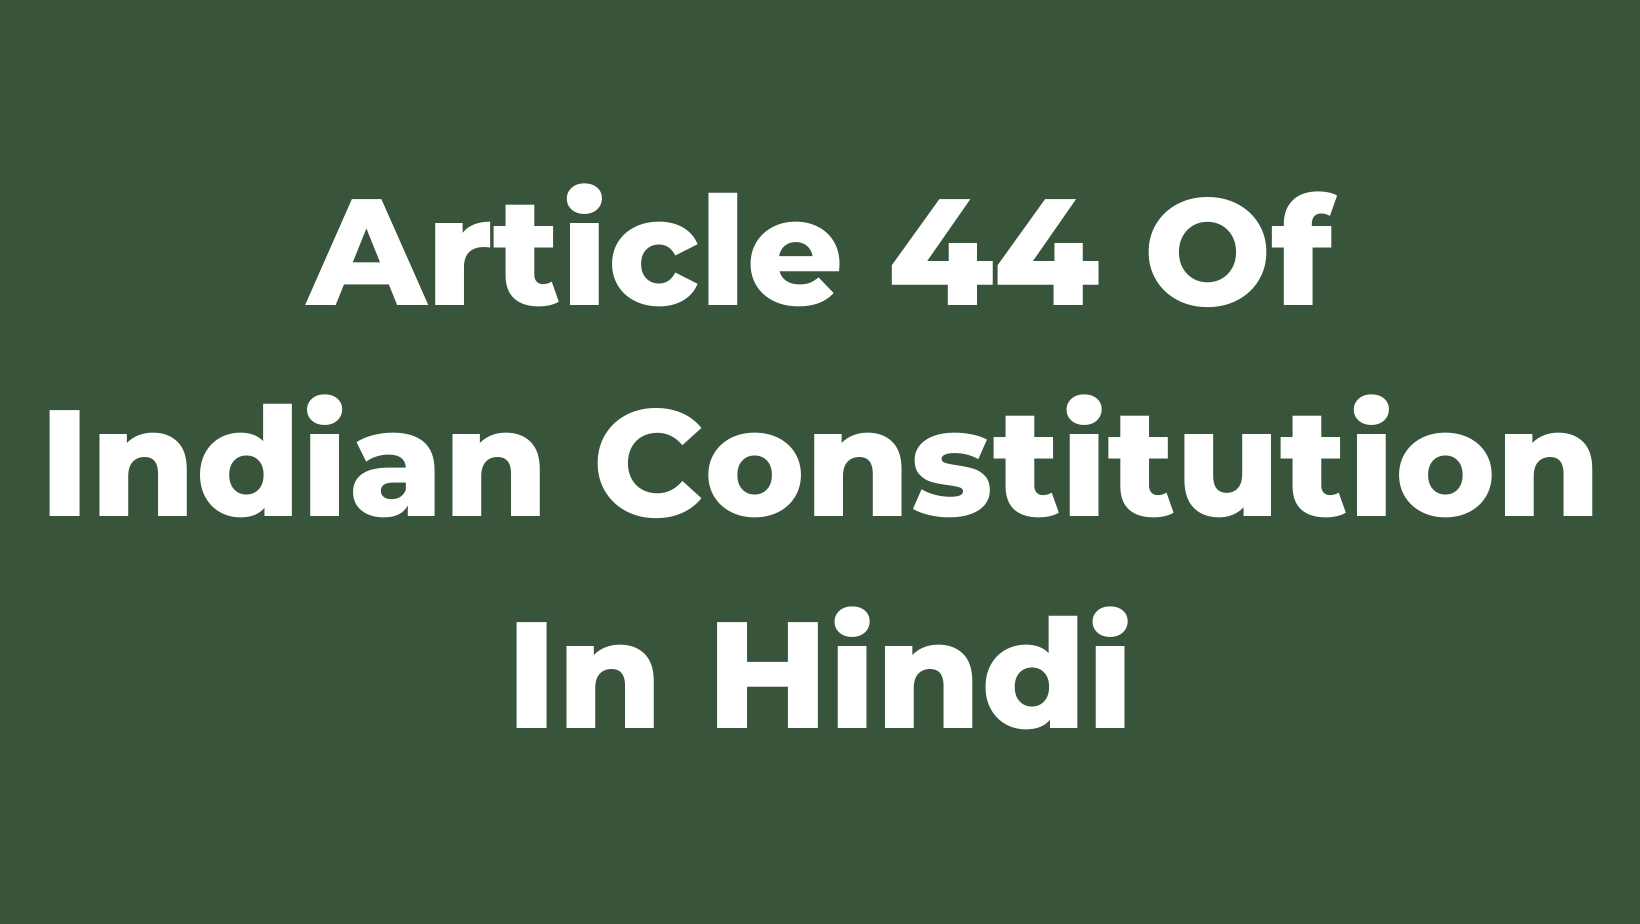 Article 44 In Hindi Of Indian Constitution